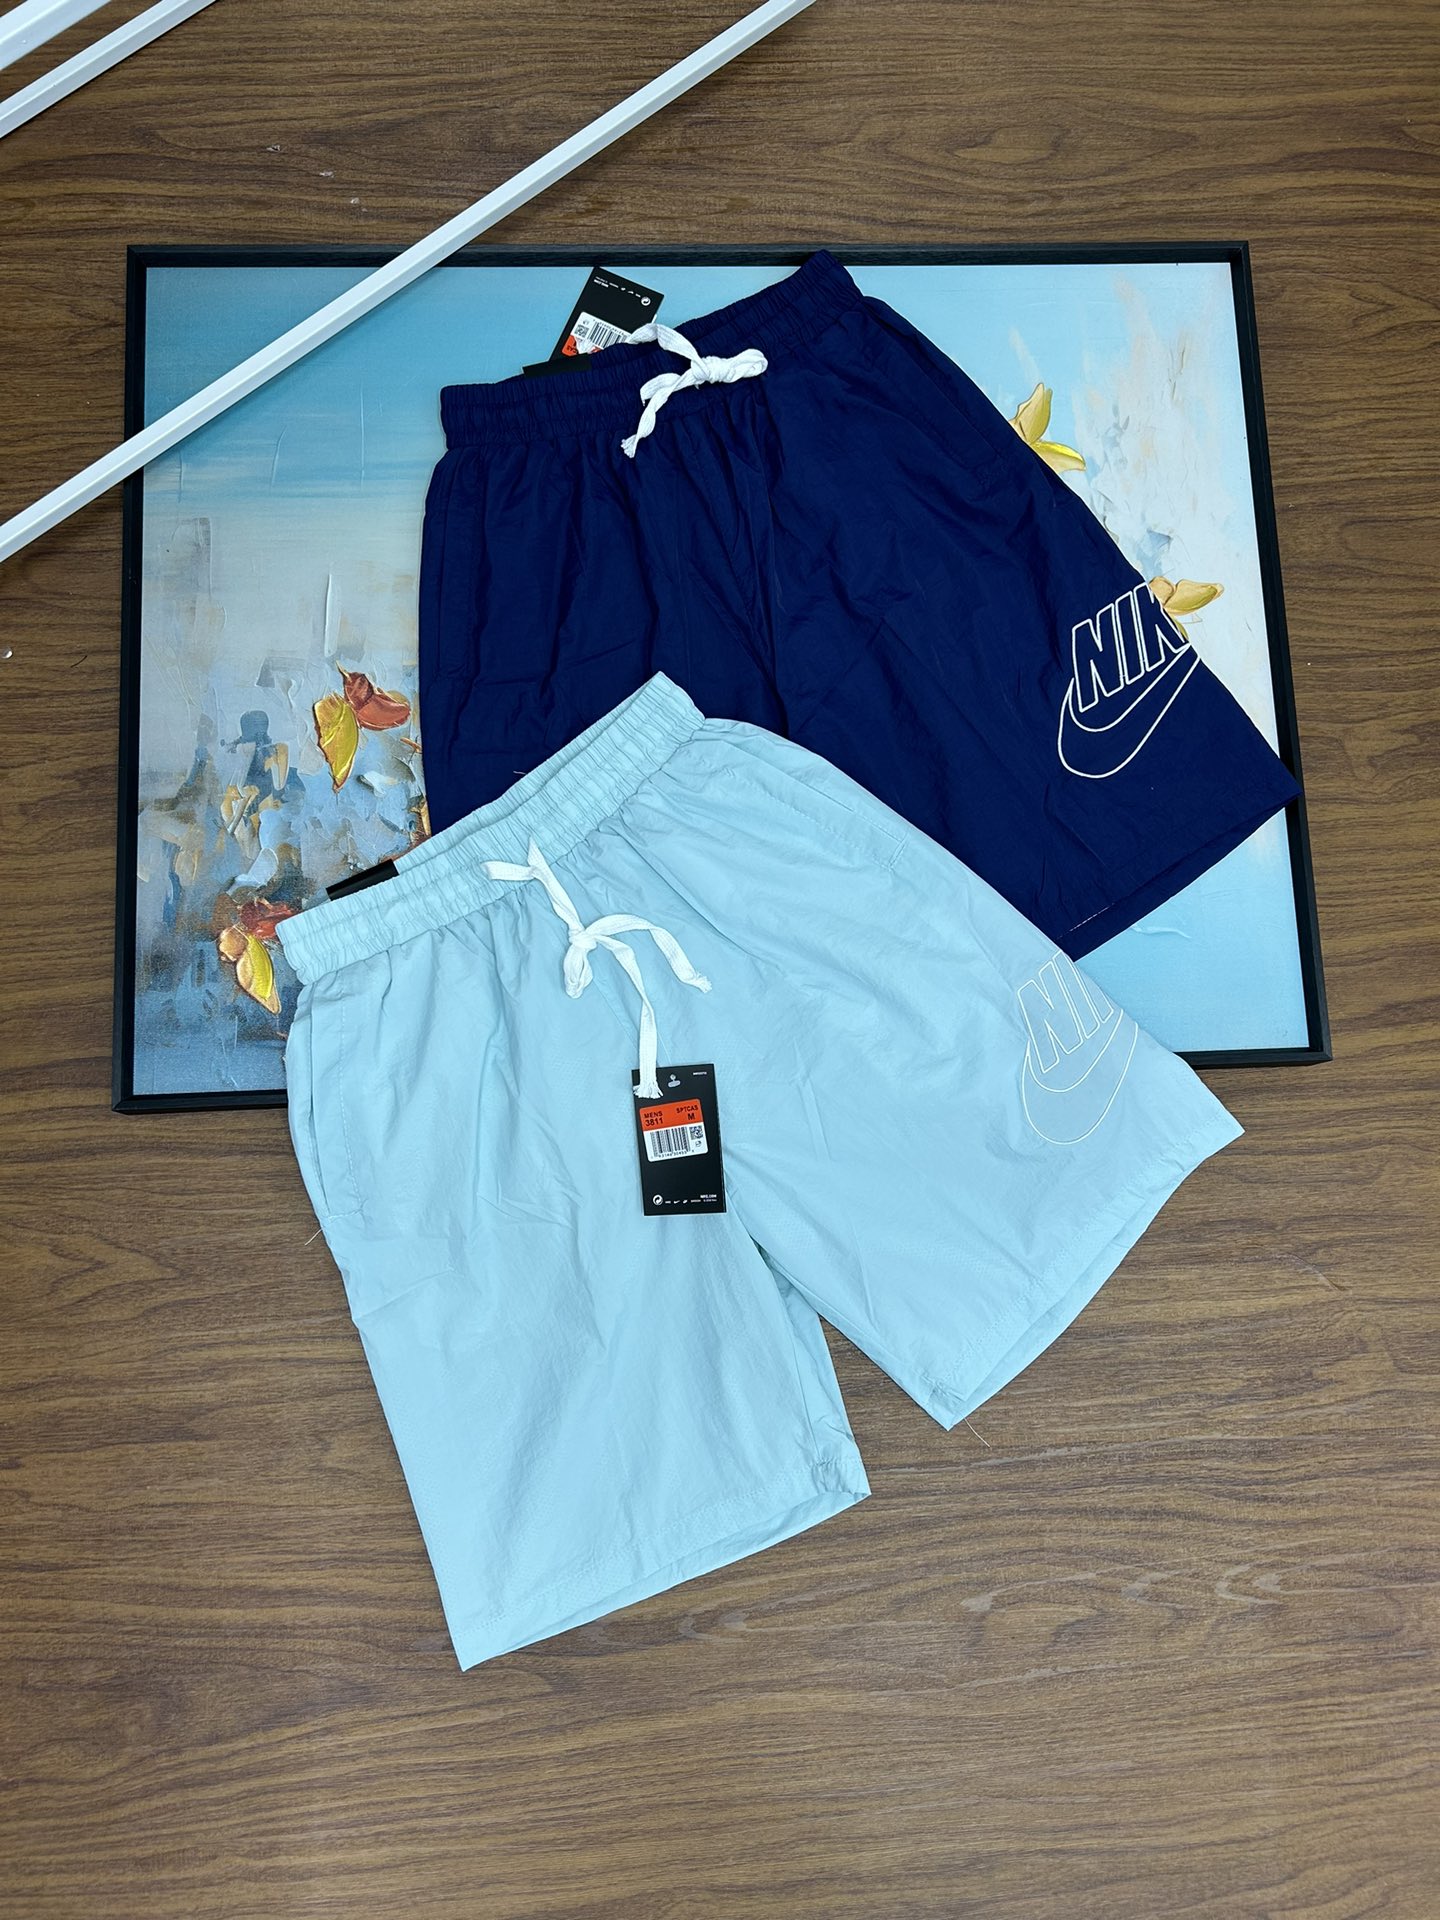 Nike Clothing Pants & Trousers Shorts Blue Embroidery Unisex Mesh Cloth Summer Collection Beach